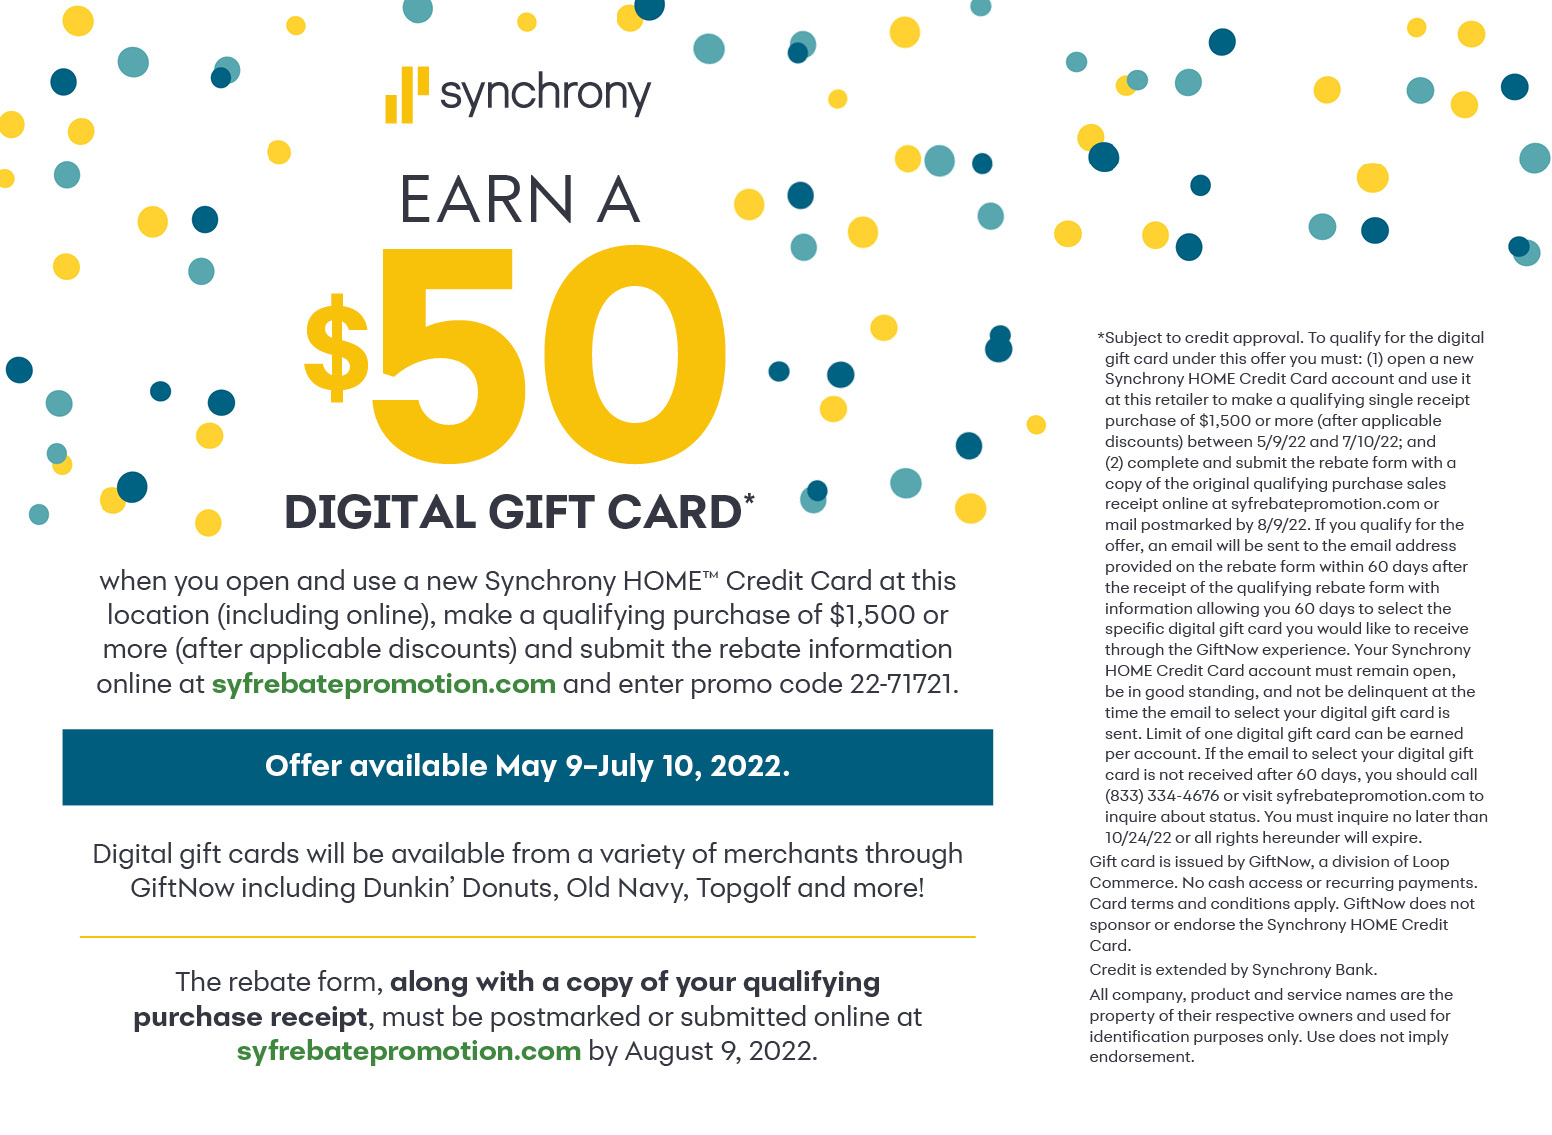 Synchrony $50 Digital Gift Card Offer May 9th thru July 10th 2022 - Apply for credit link